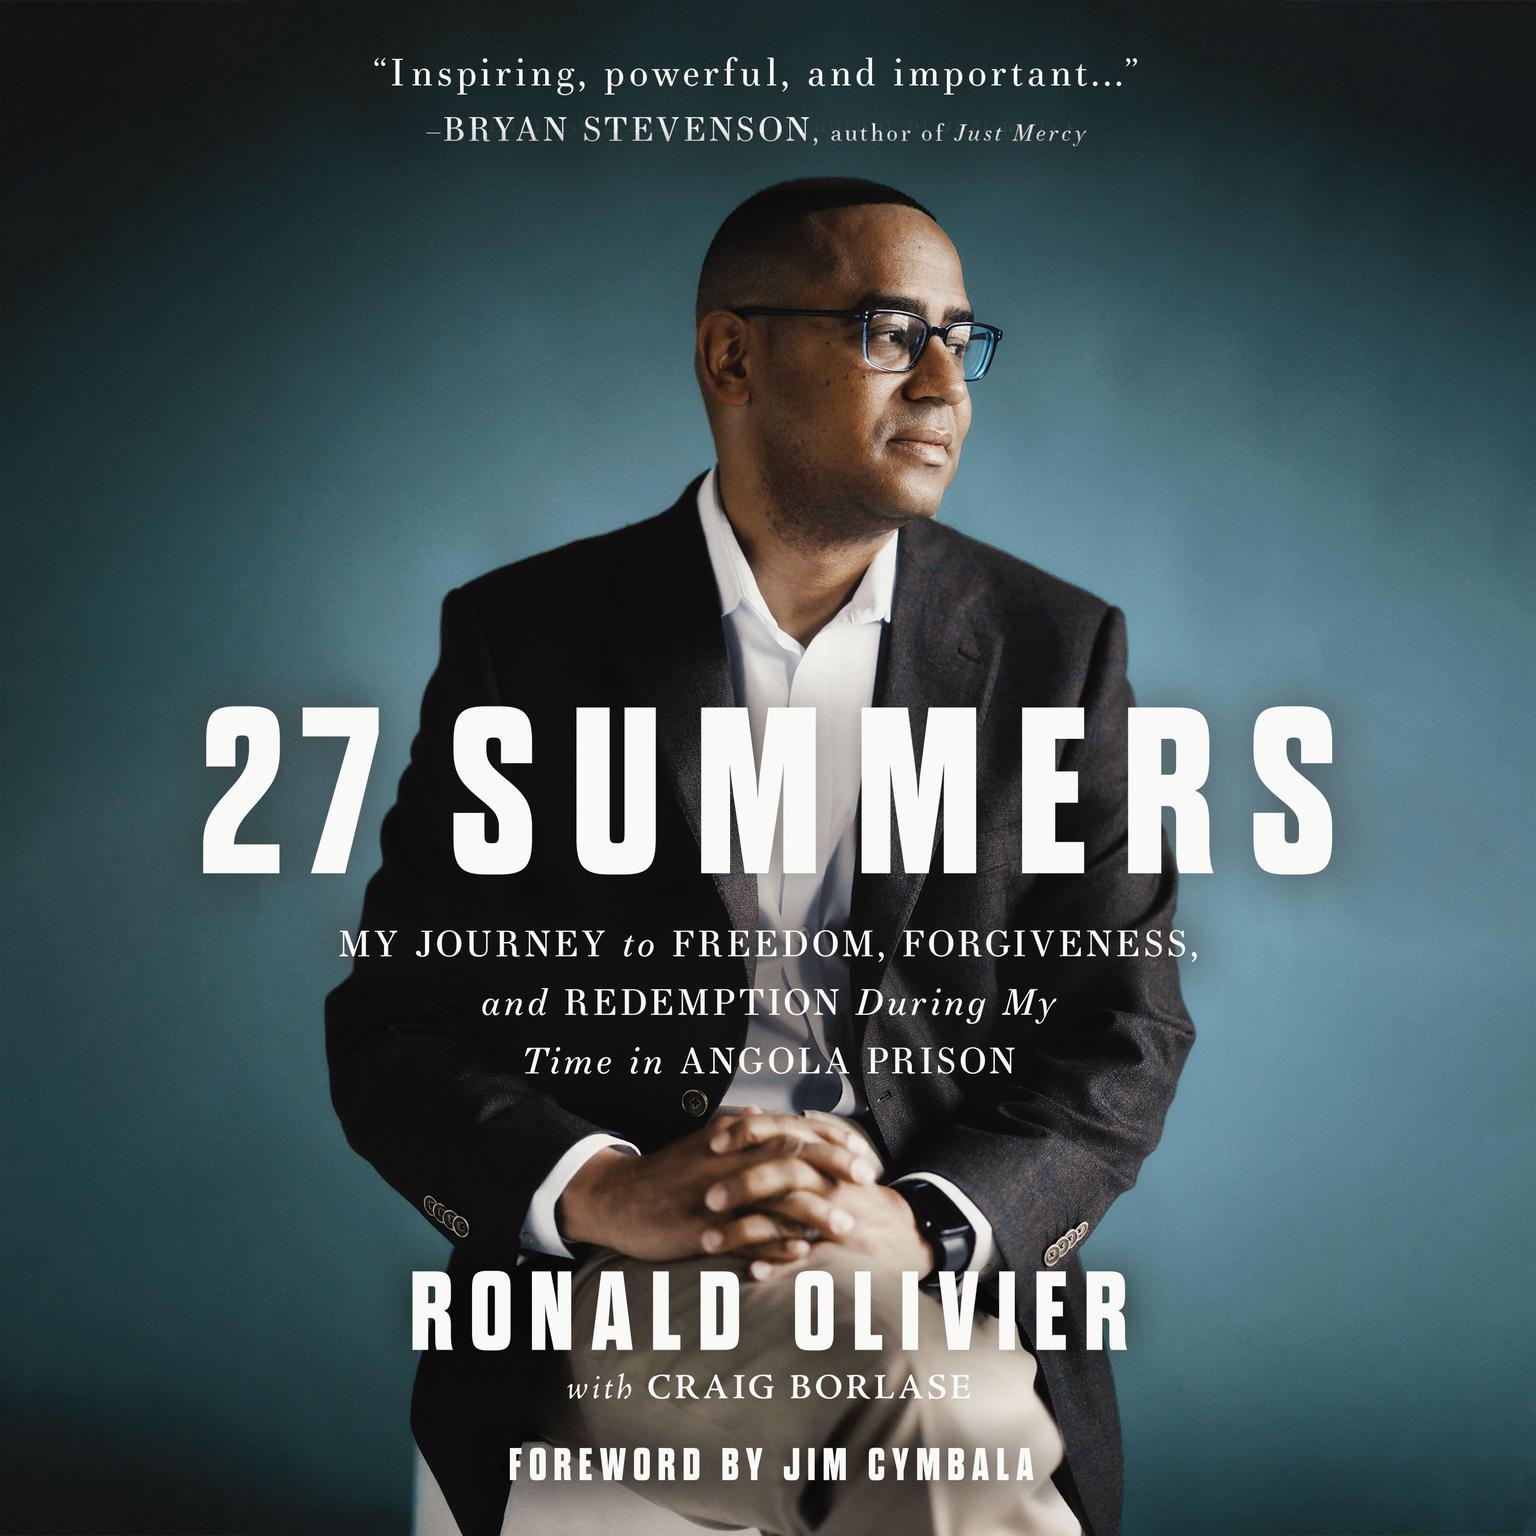 27 Summers: My Journey to Freedom, Forgiveness, and Redemption During My Time in Angola Prison Audiobook, by Ronald Olivier